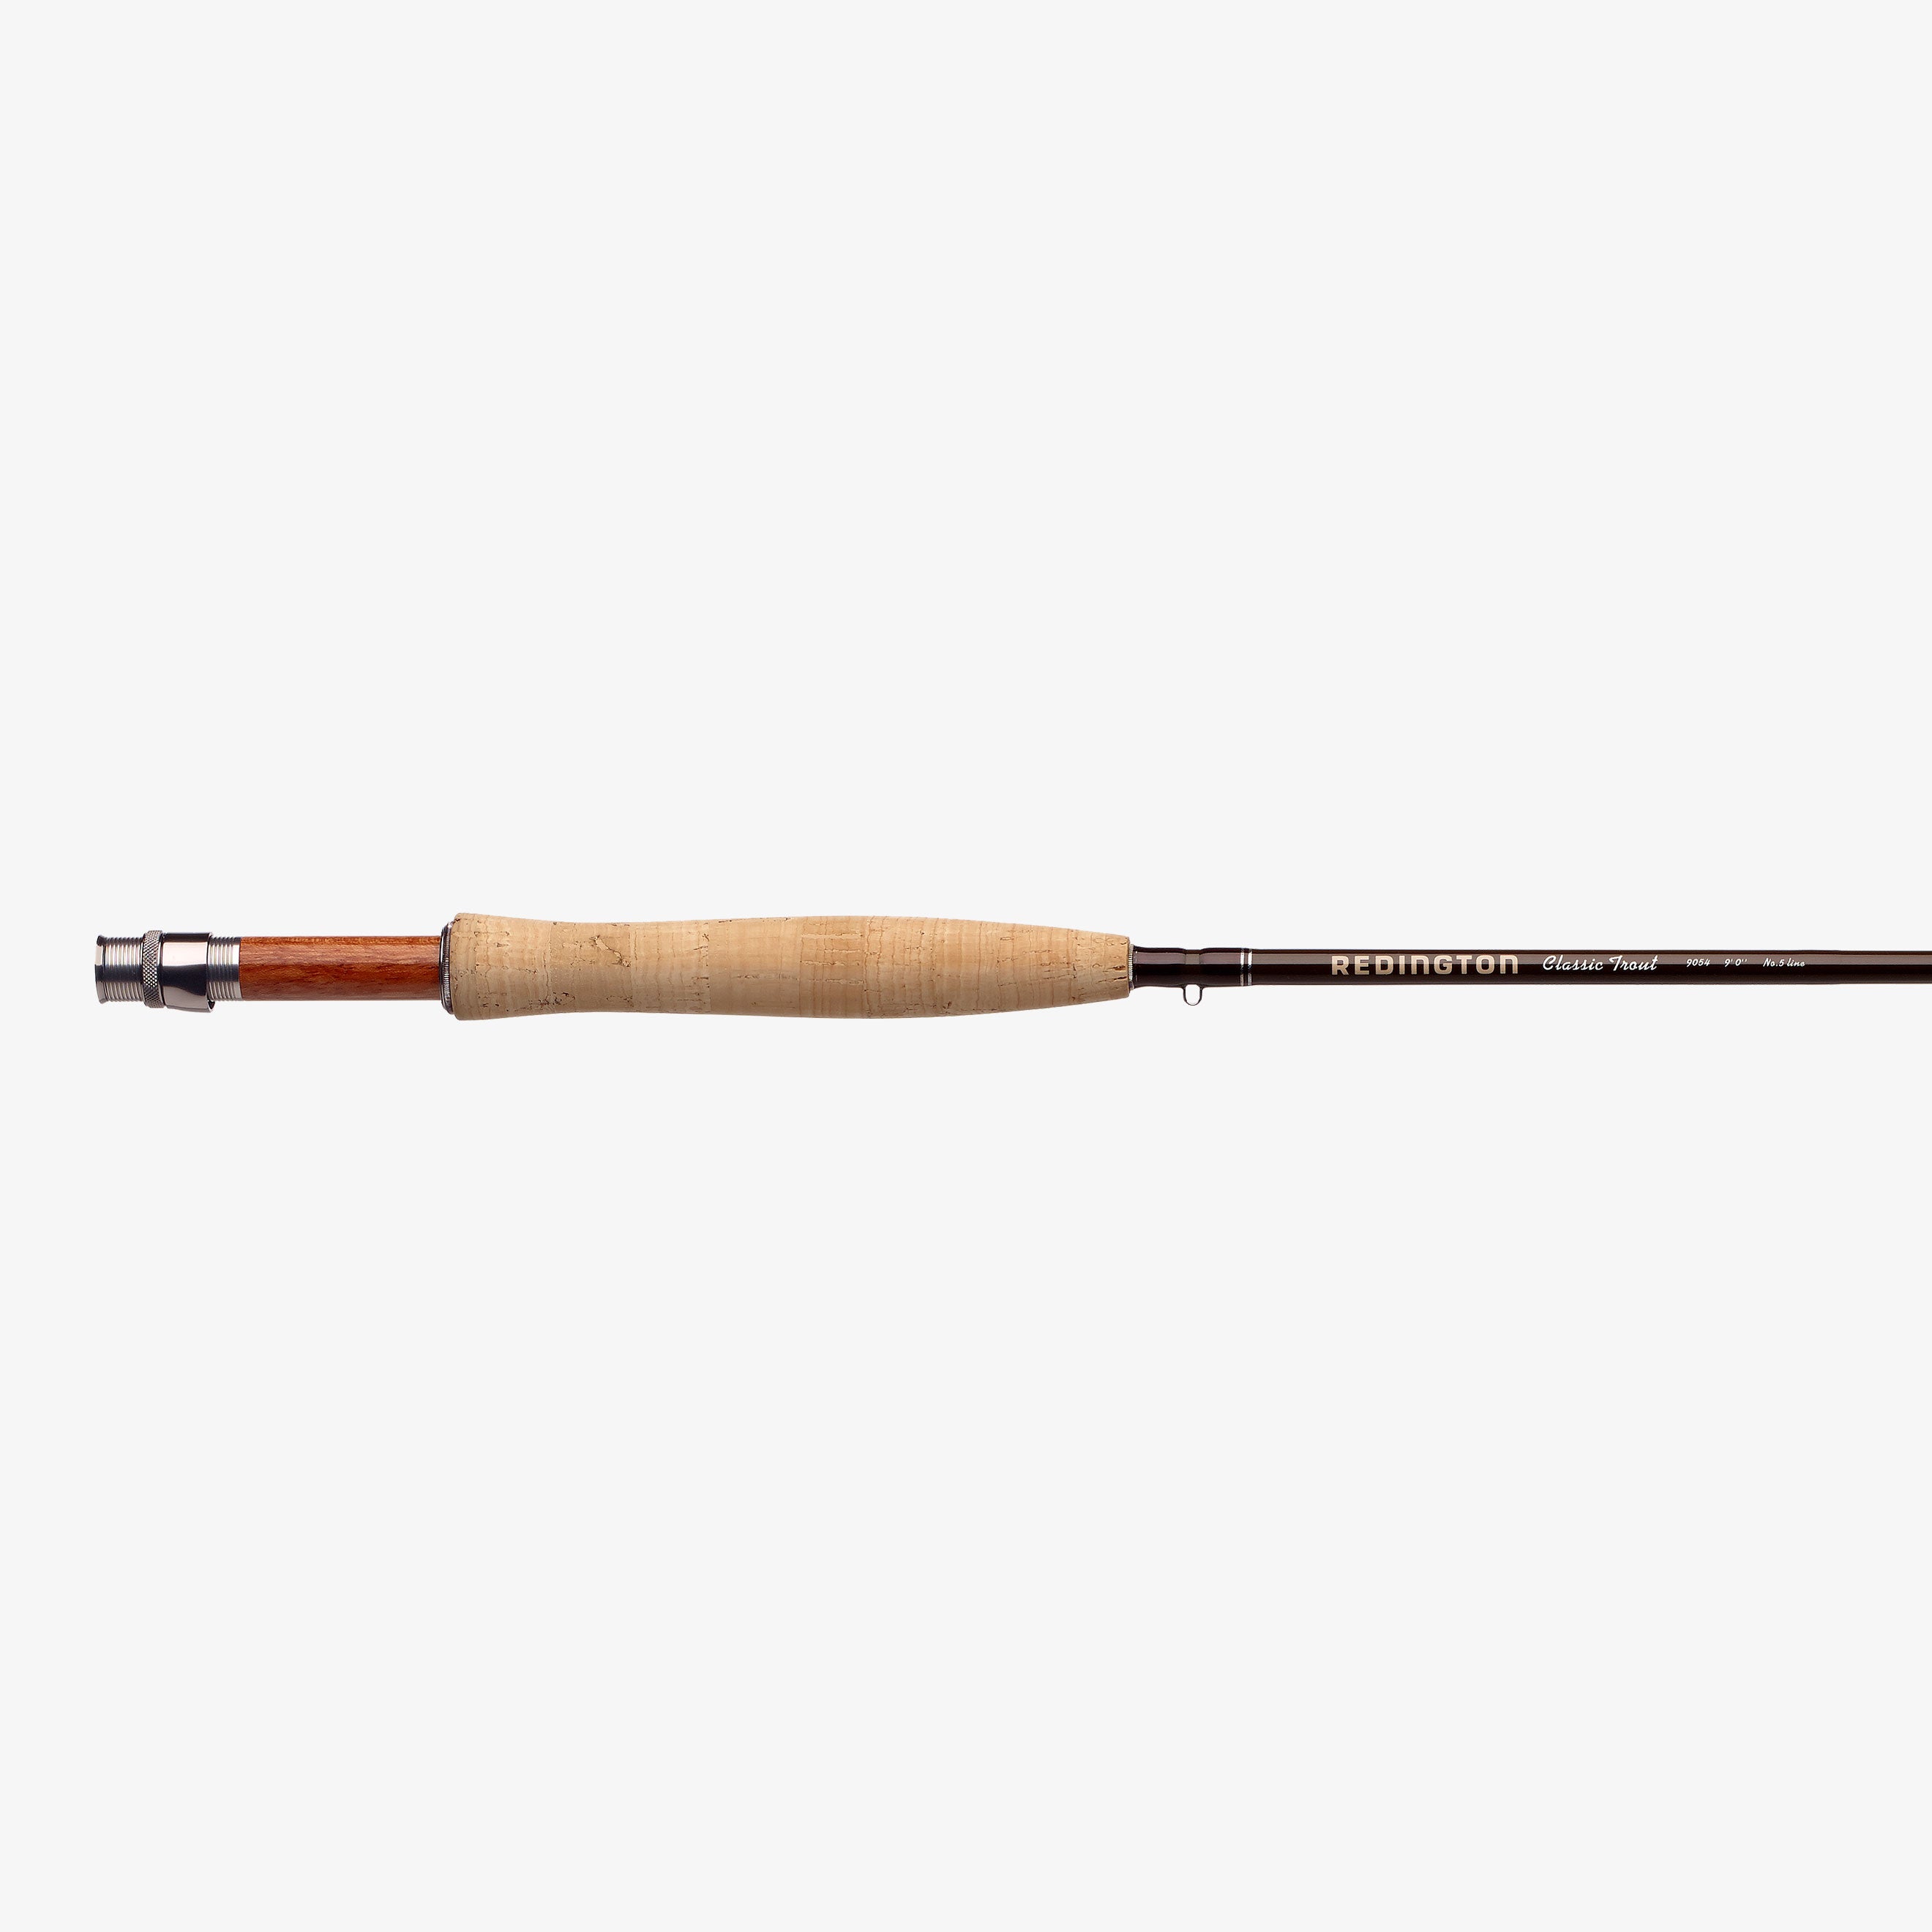 CLASSIC TROUT Fly Fishing Rod 3 Weight, 8ft 6in